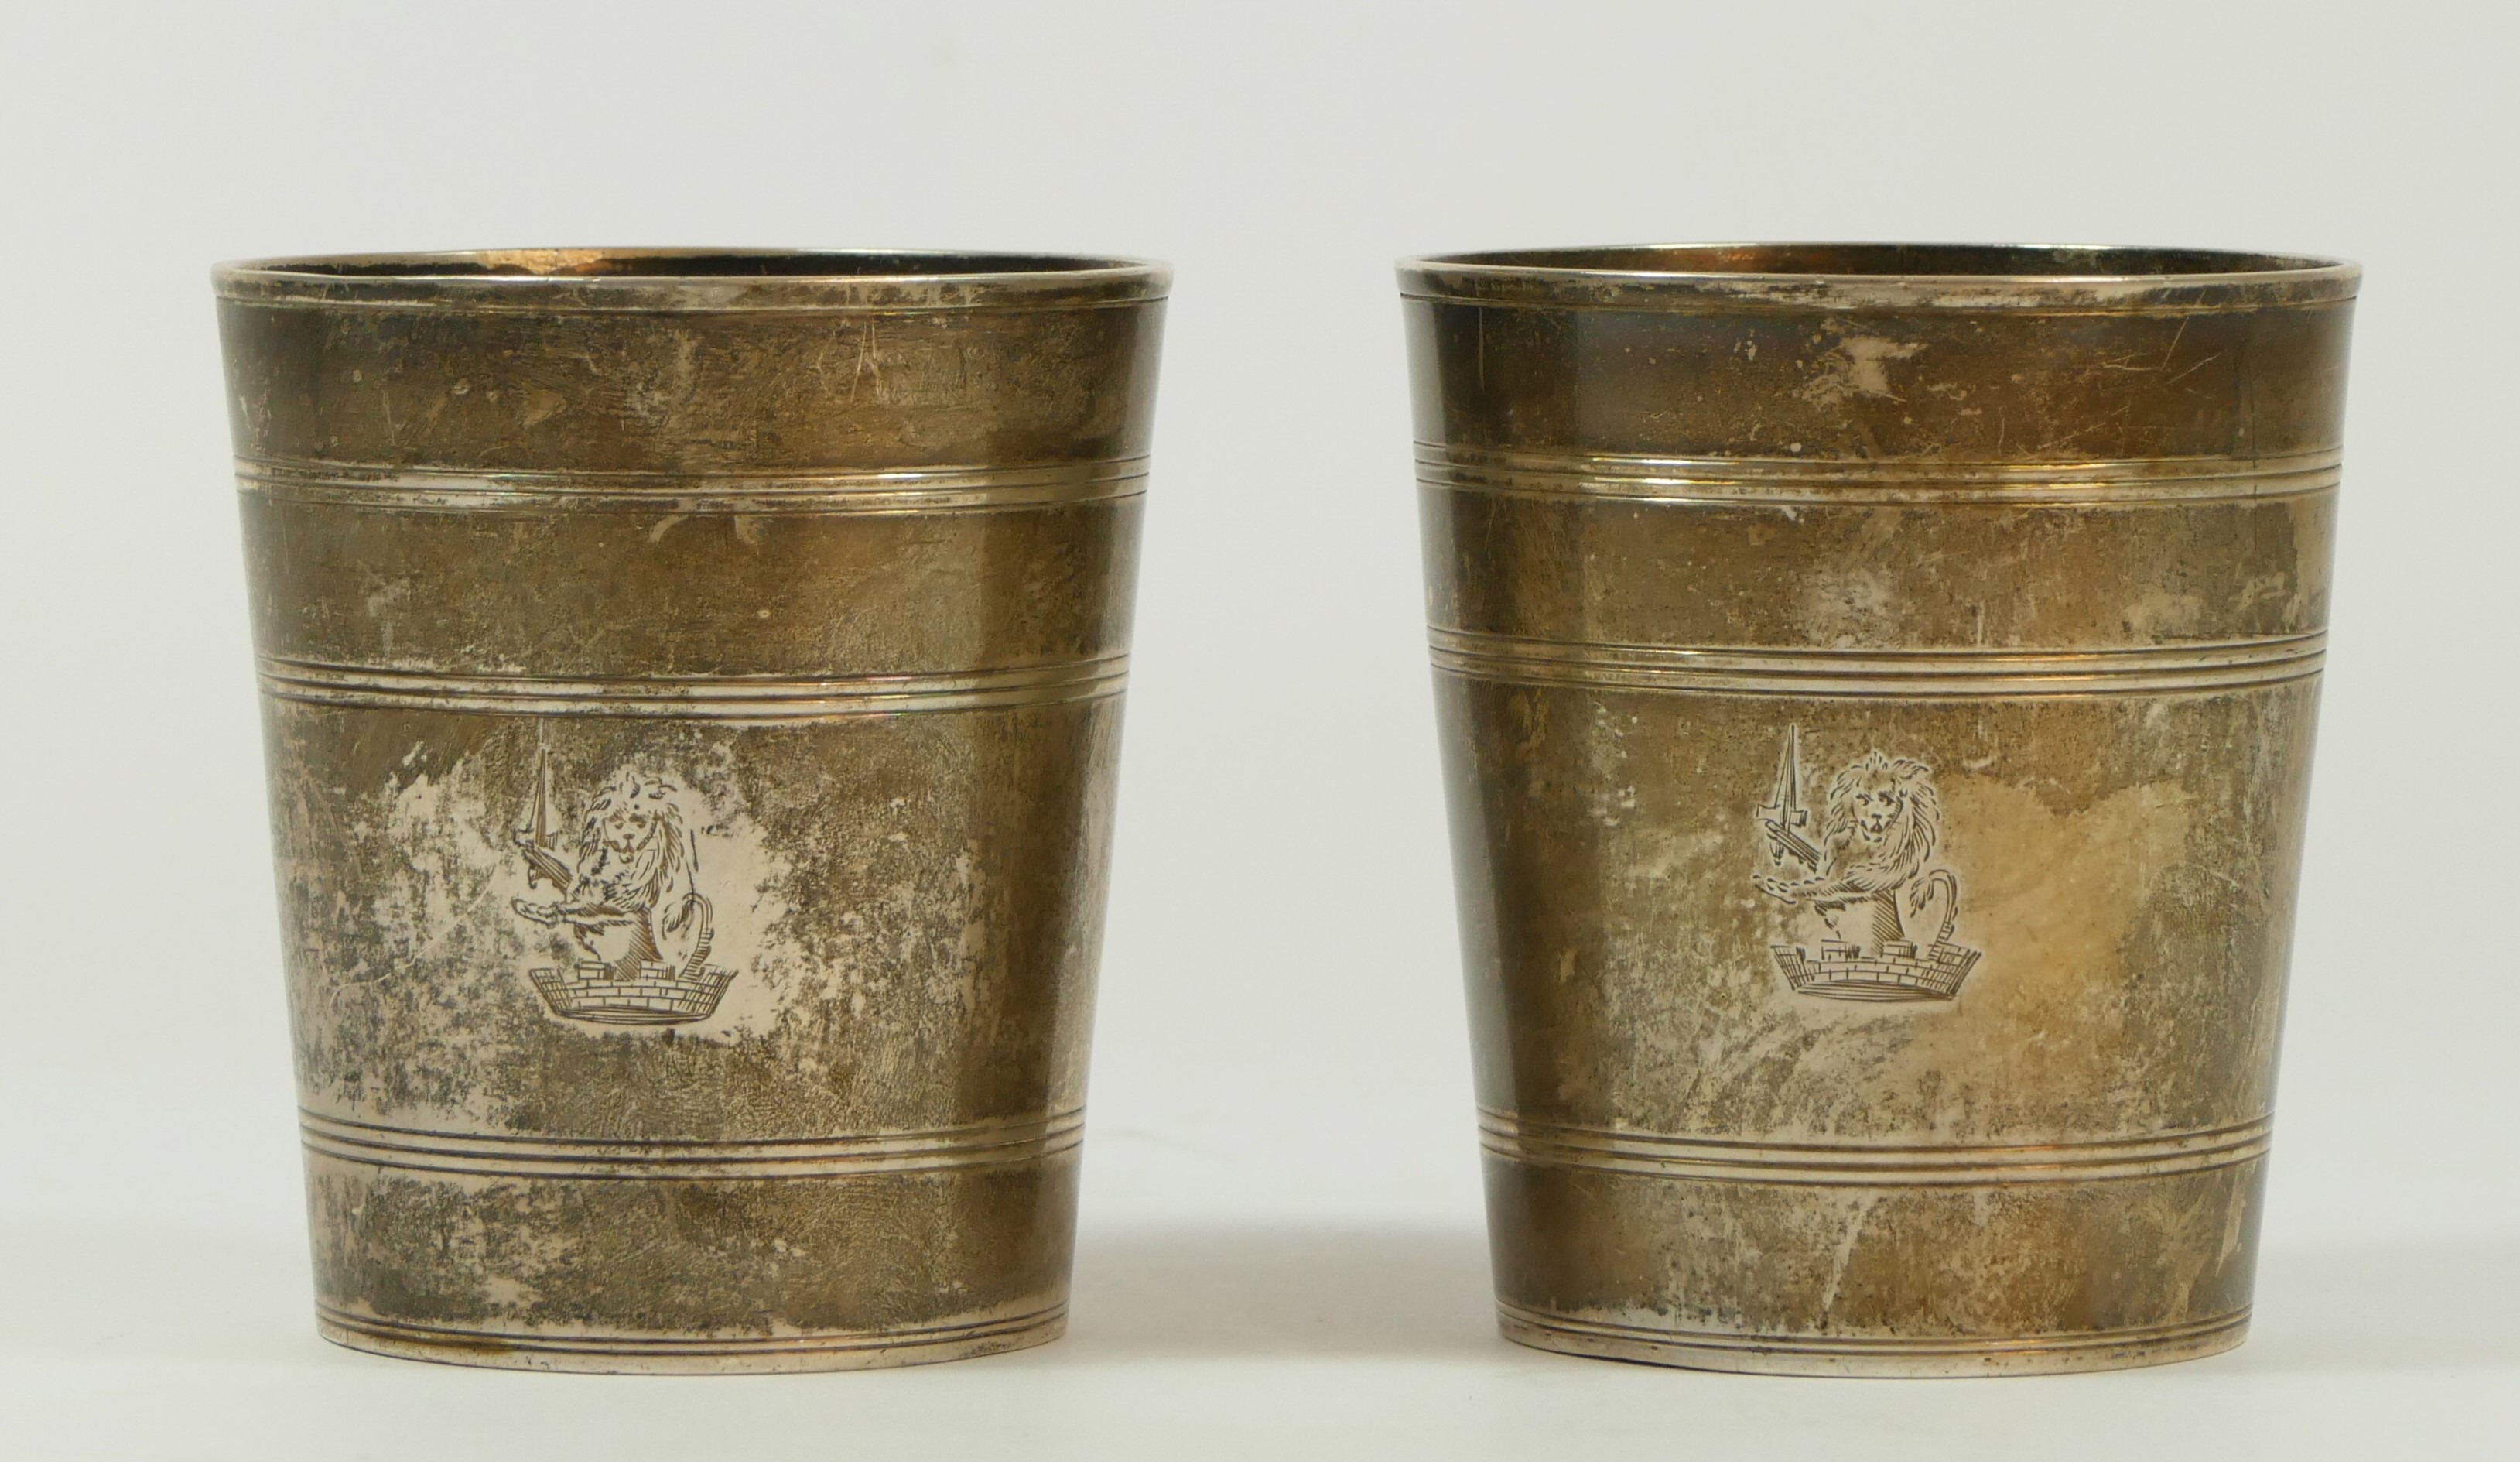 A George III silver pair of tapering beakers, by John Eames, London 1818, with line engraved